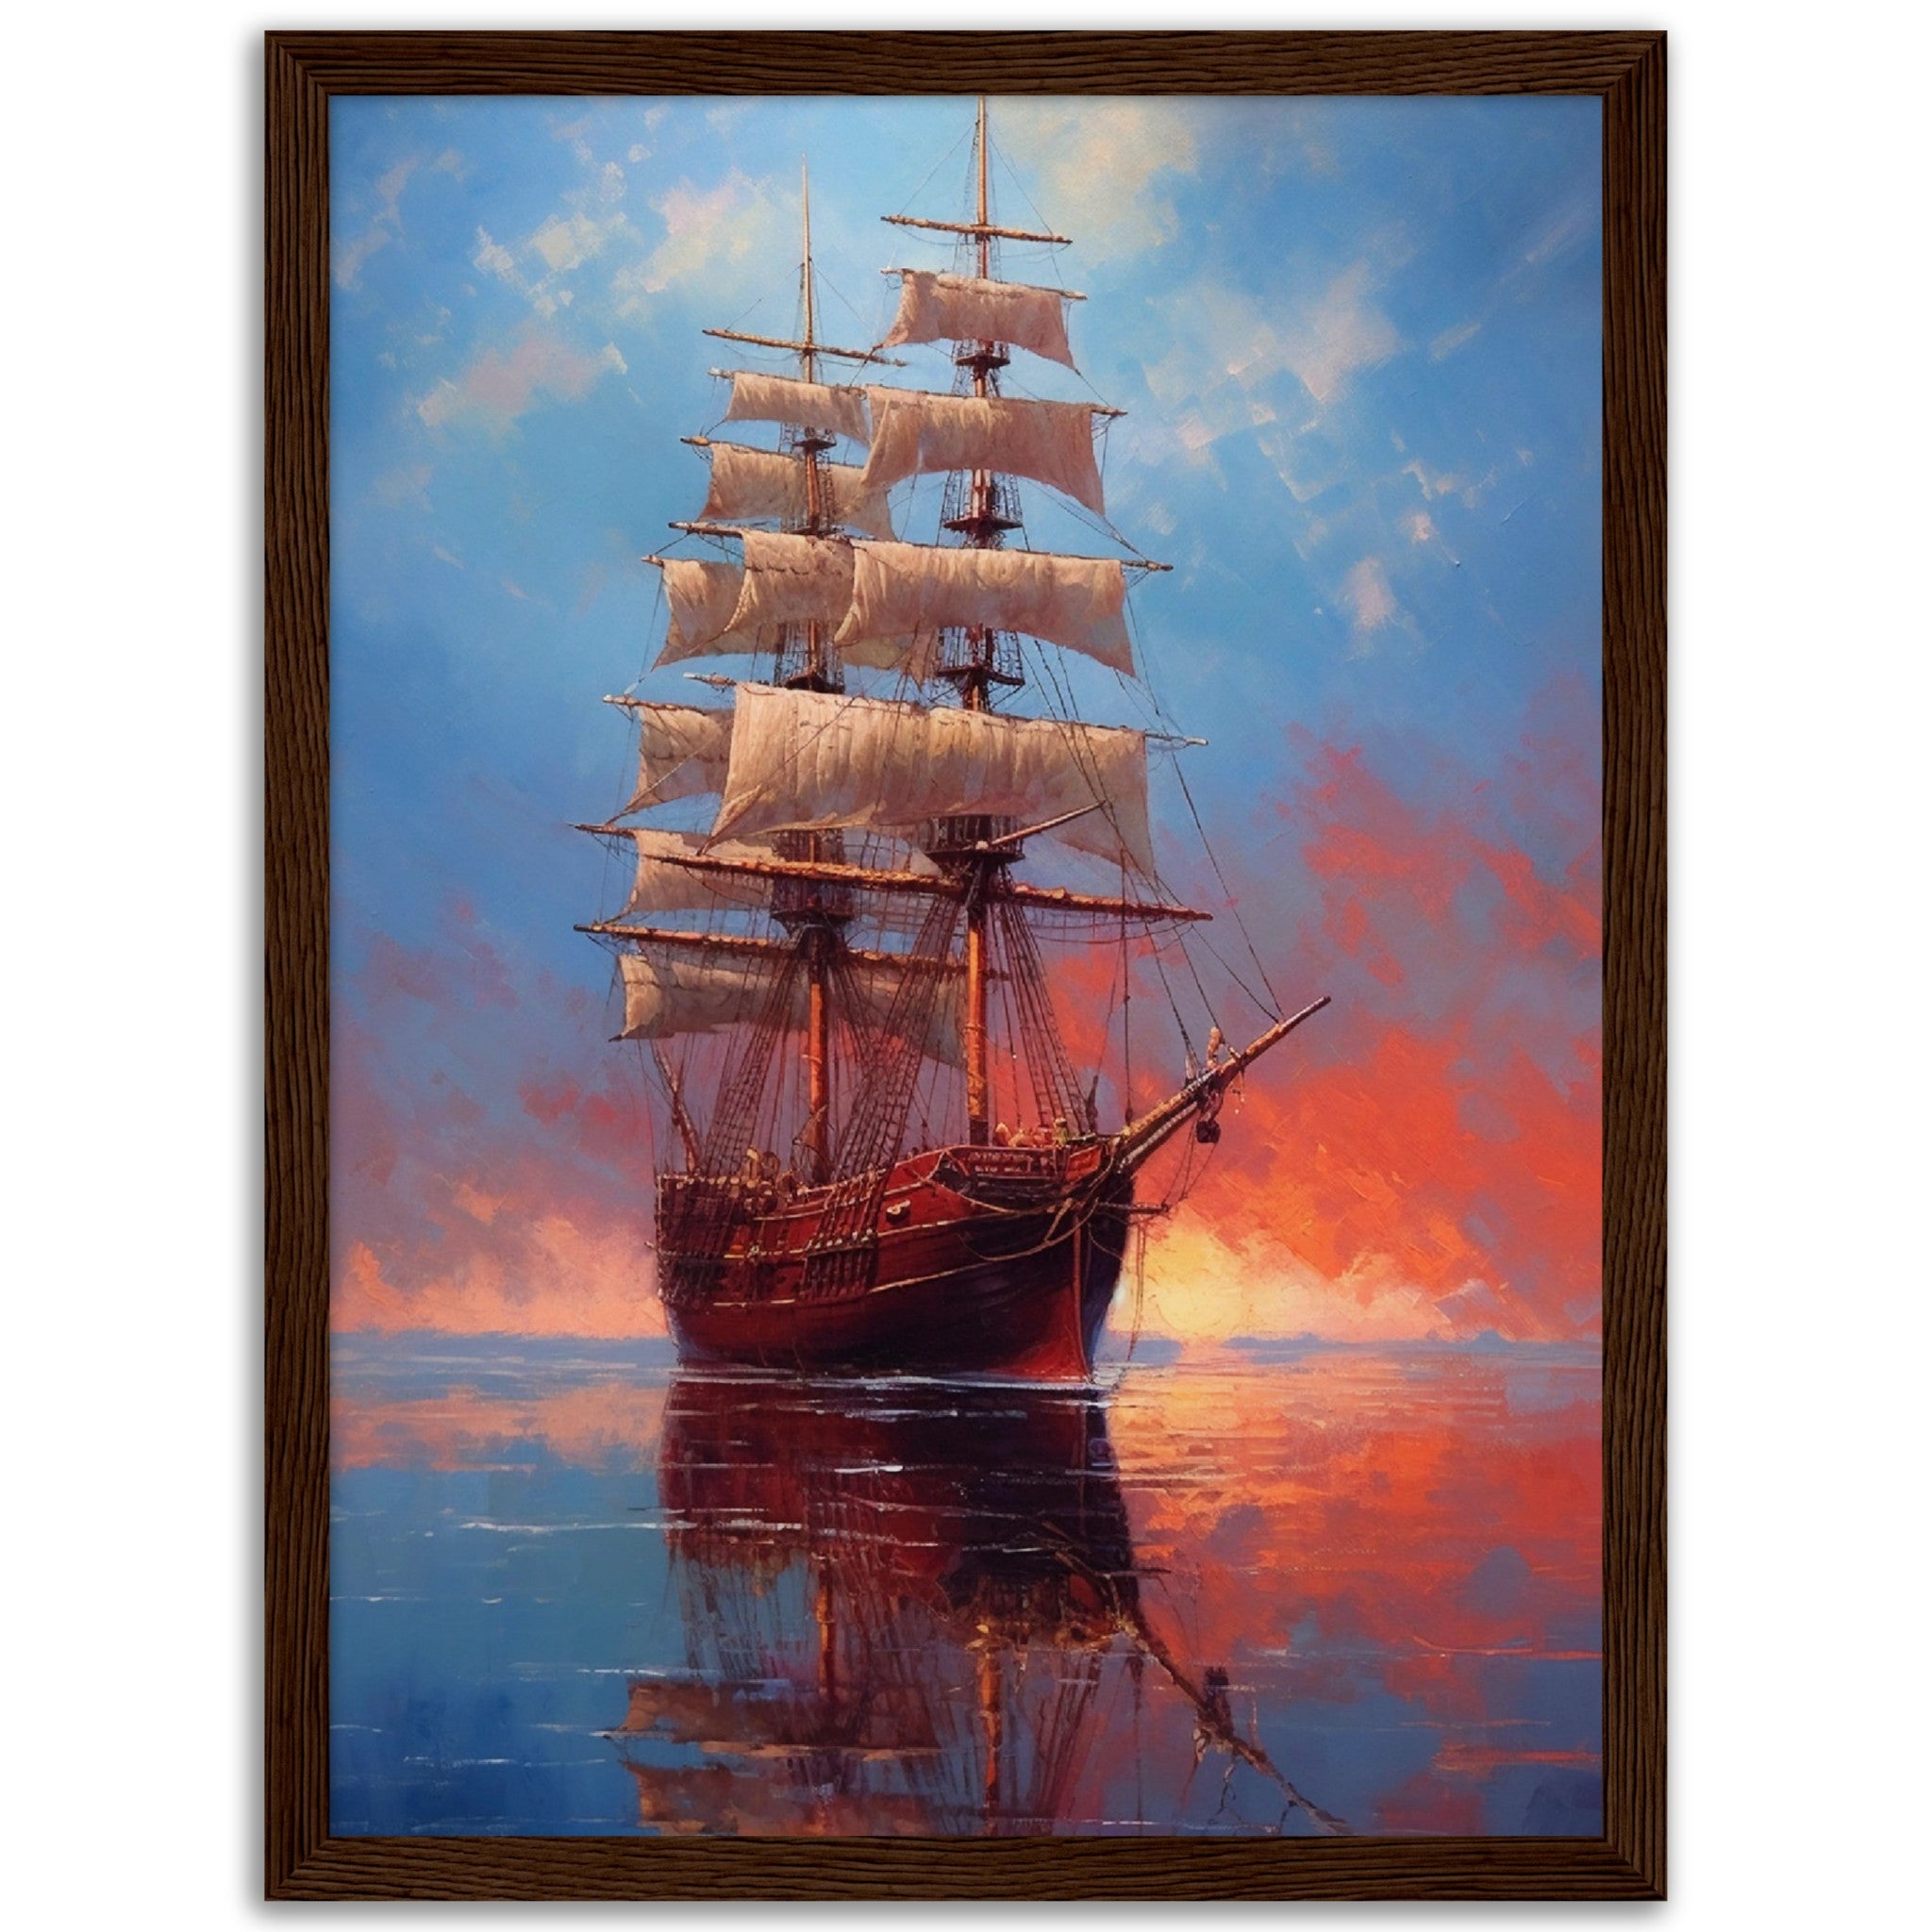 Ship Sailing Into Sunset - immersiarts